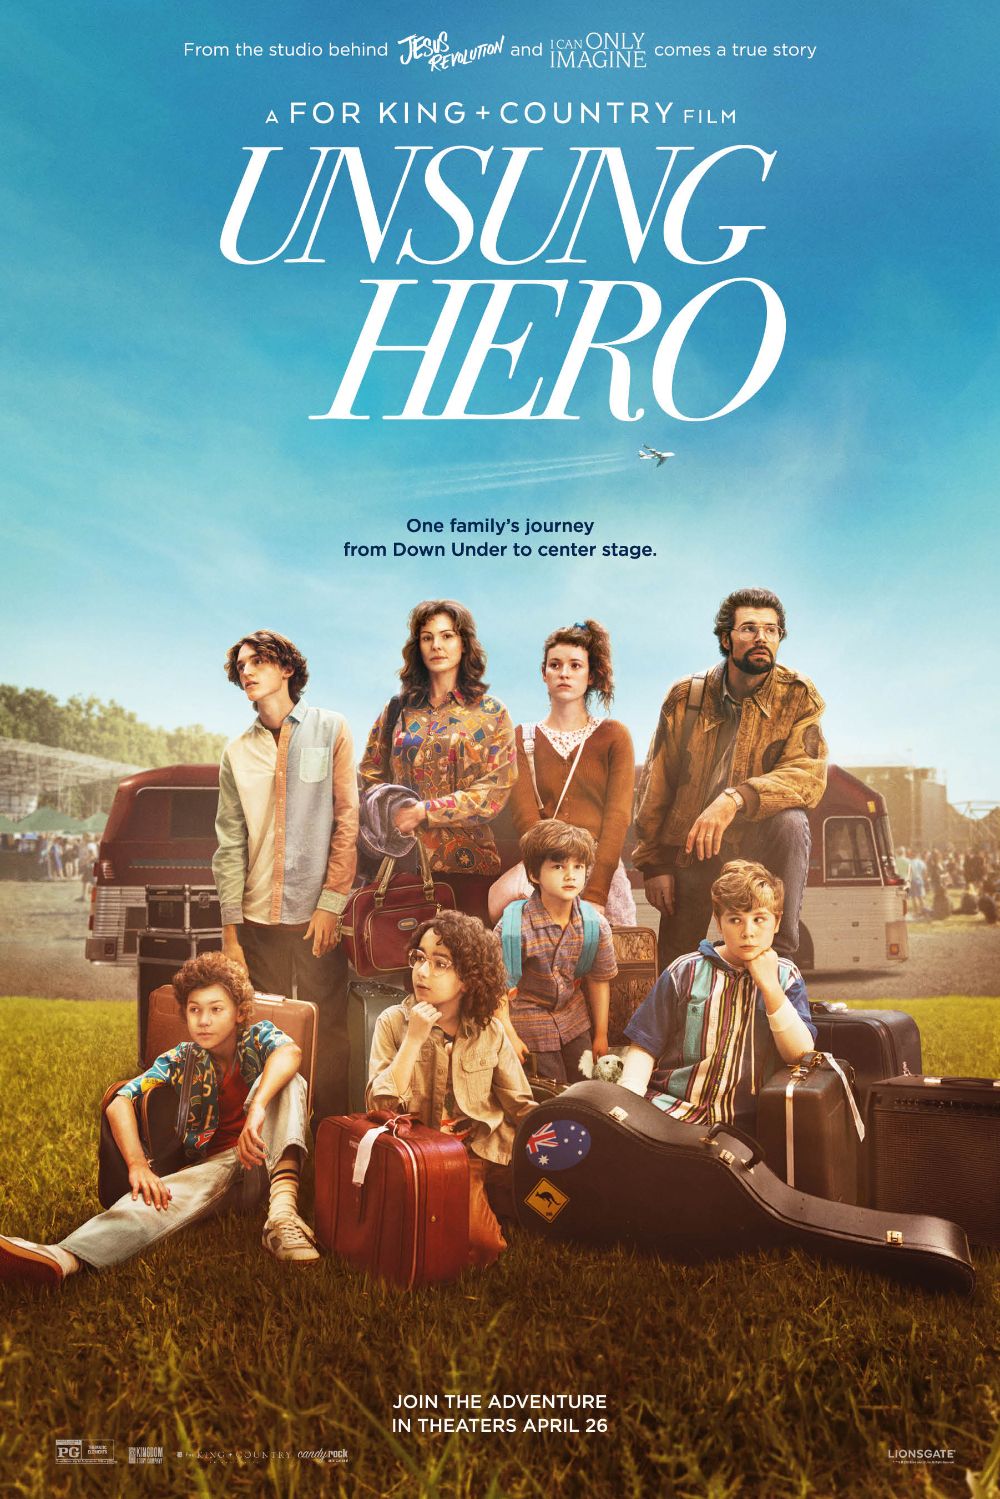 Unsung Hero a For King + Country Film poster